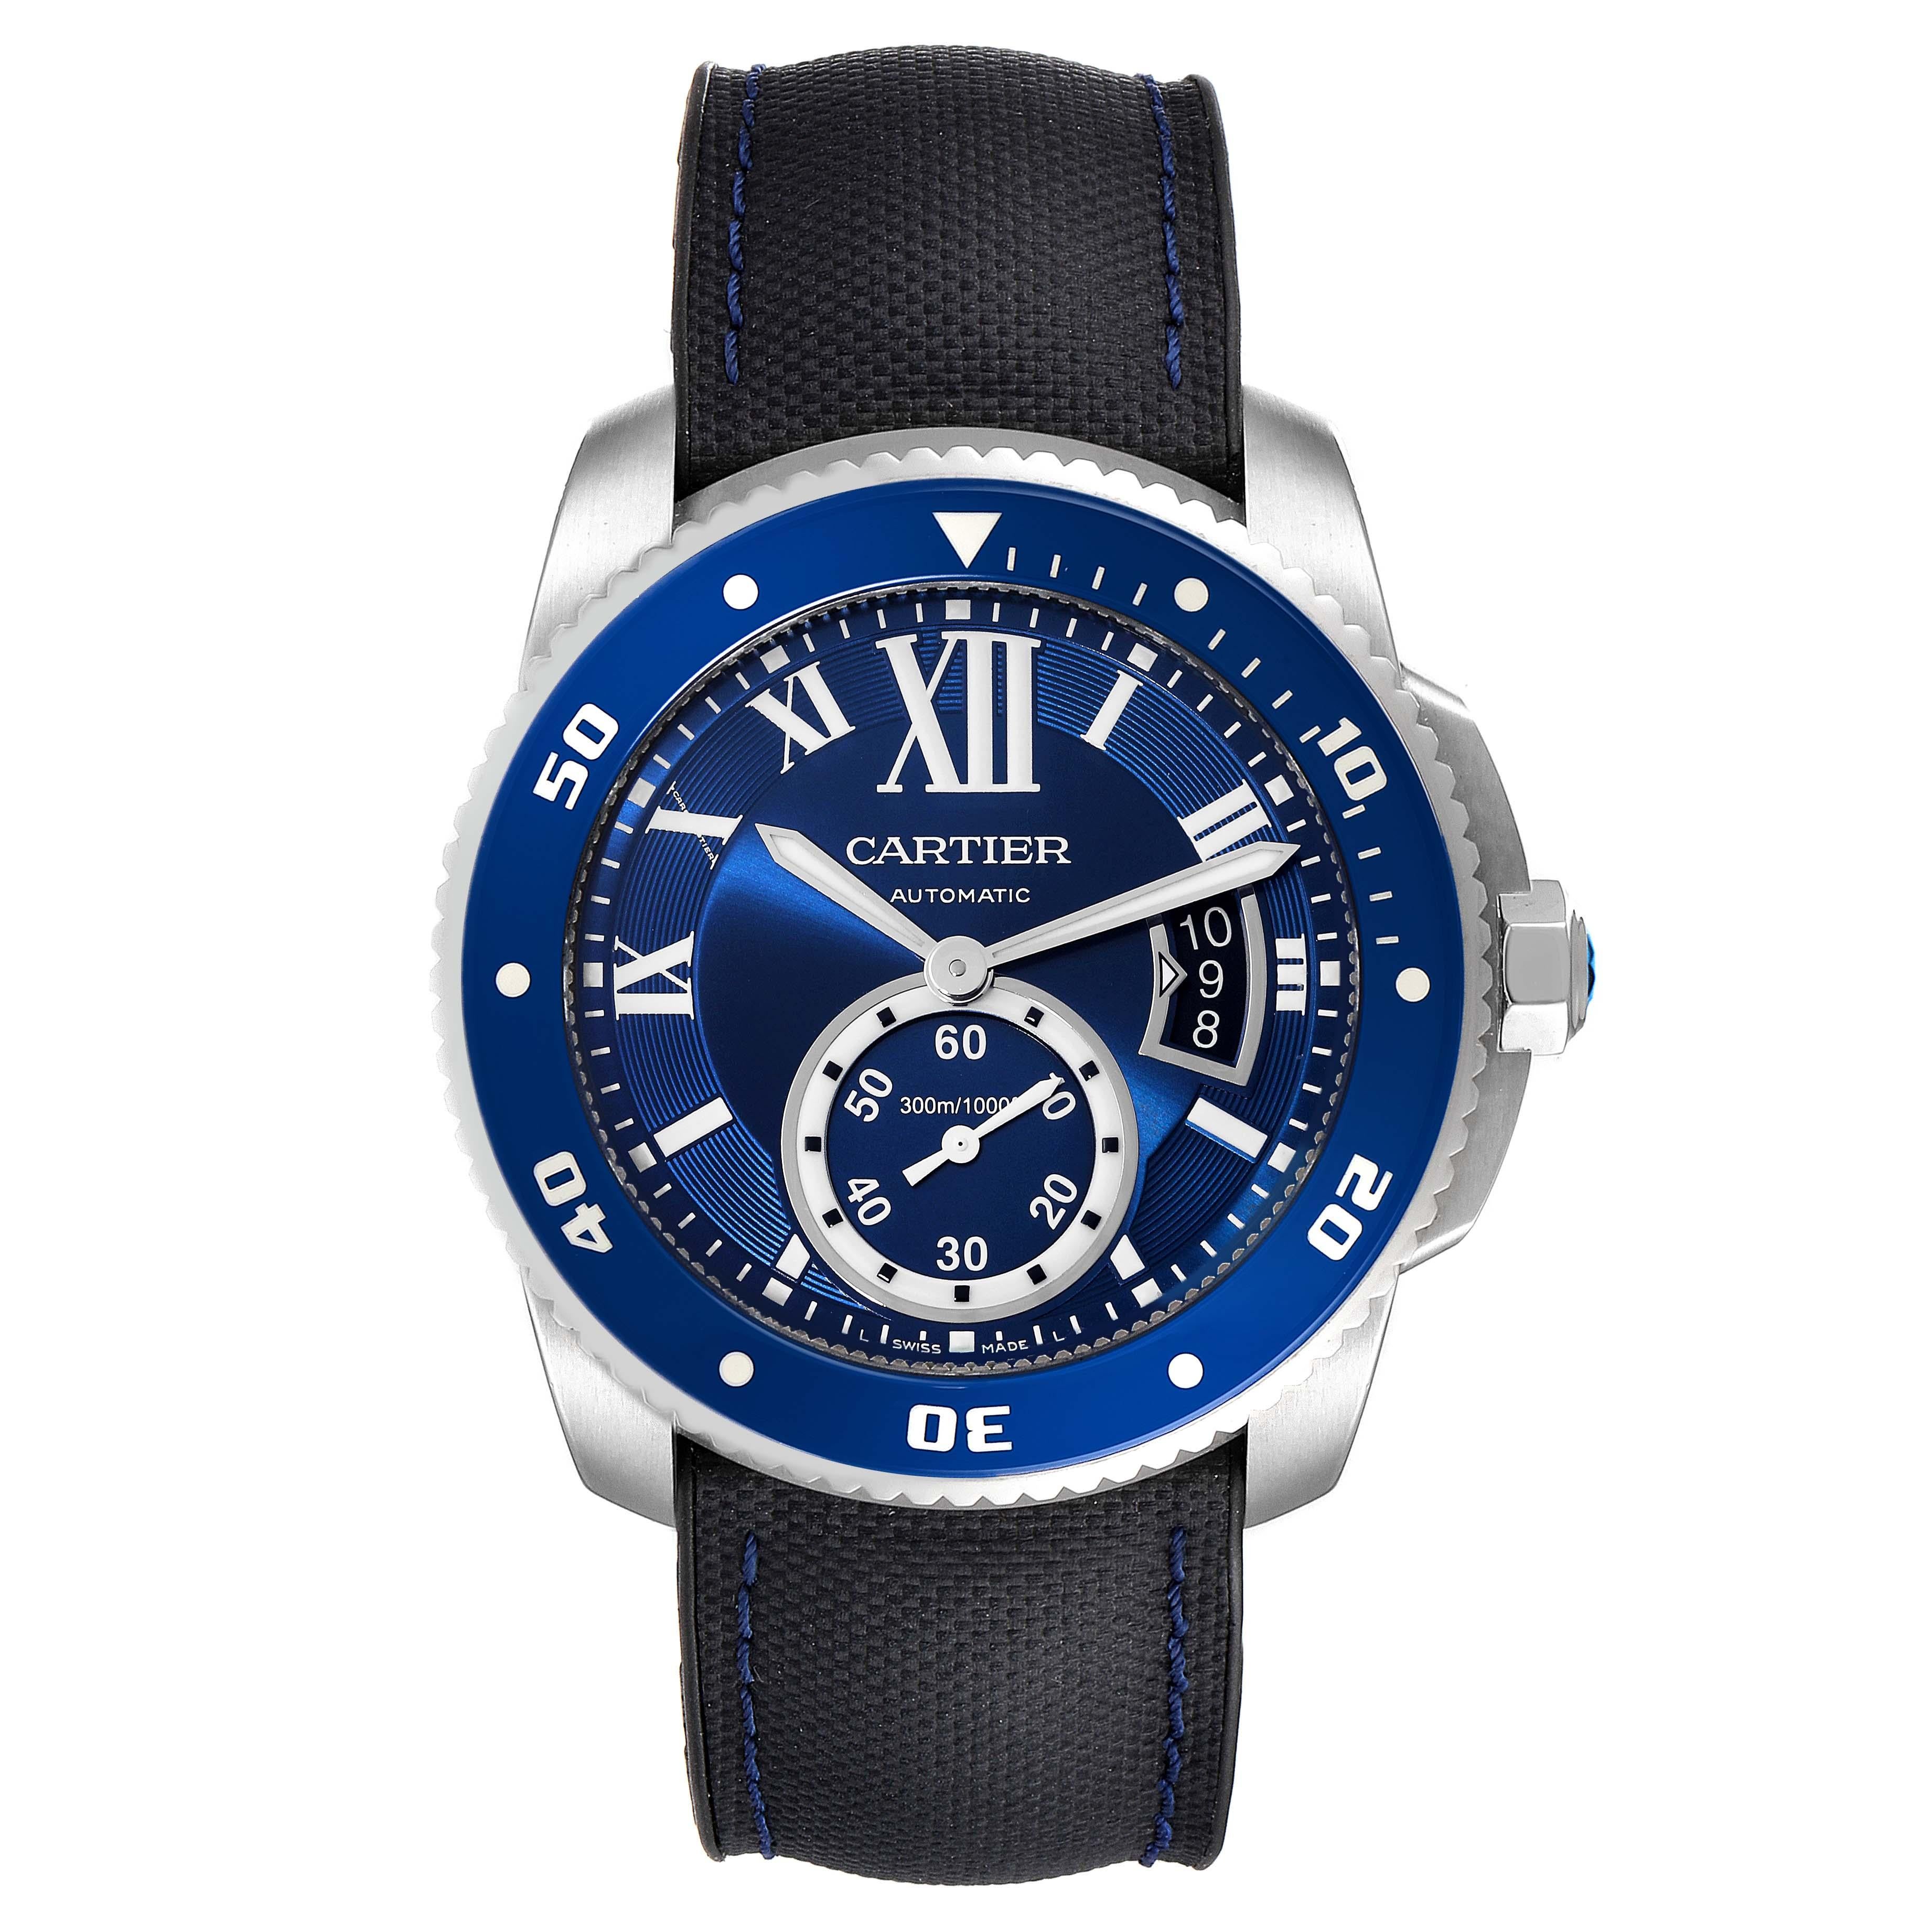 Cartier Calibre Diver Blue Dial Steel Mens Watch WSCA0010 Box Papers. Automatic self-winding movement. Stainless steel round case 42.0 mm in diameter. Crown set with faceted blue spinel. Case thickness: 11 mm. Blue ADLC coated stainless steel